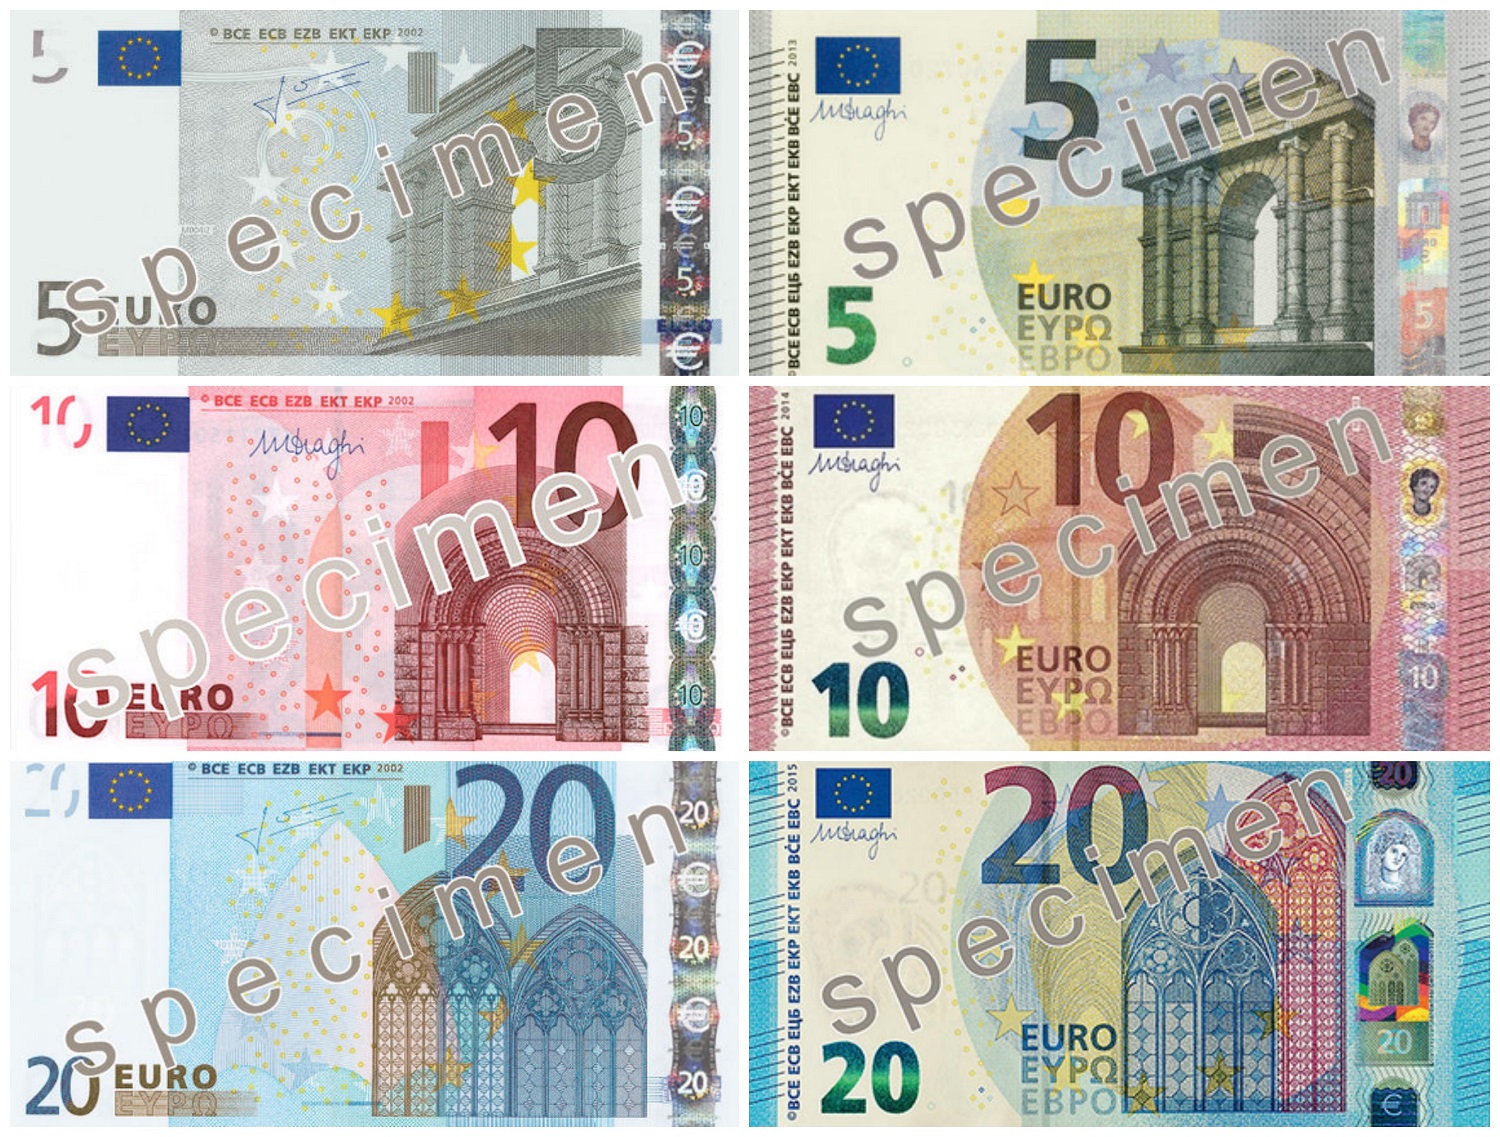 First series Euro notes vs. the new Europa series